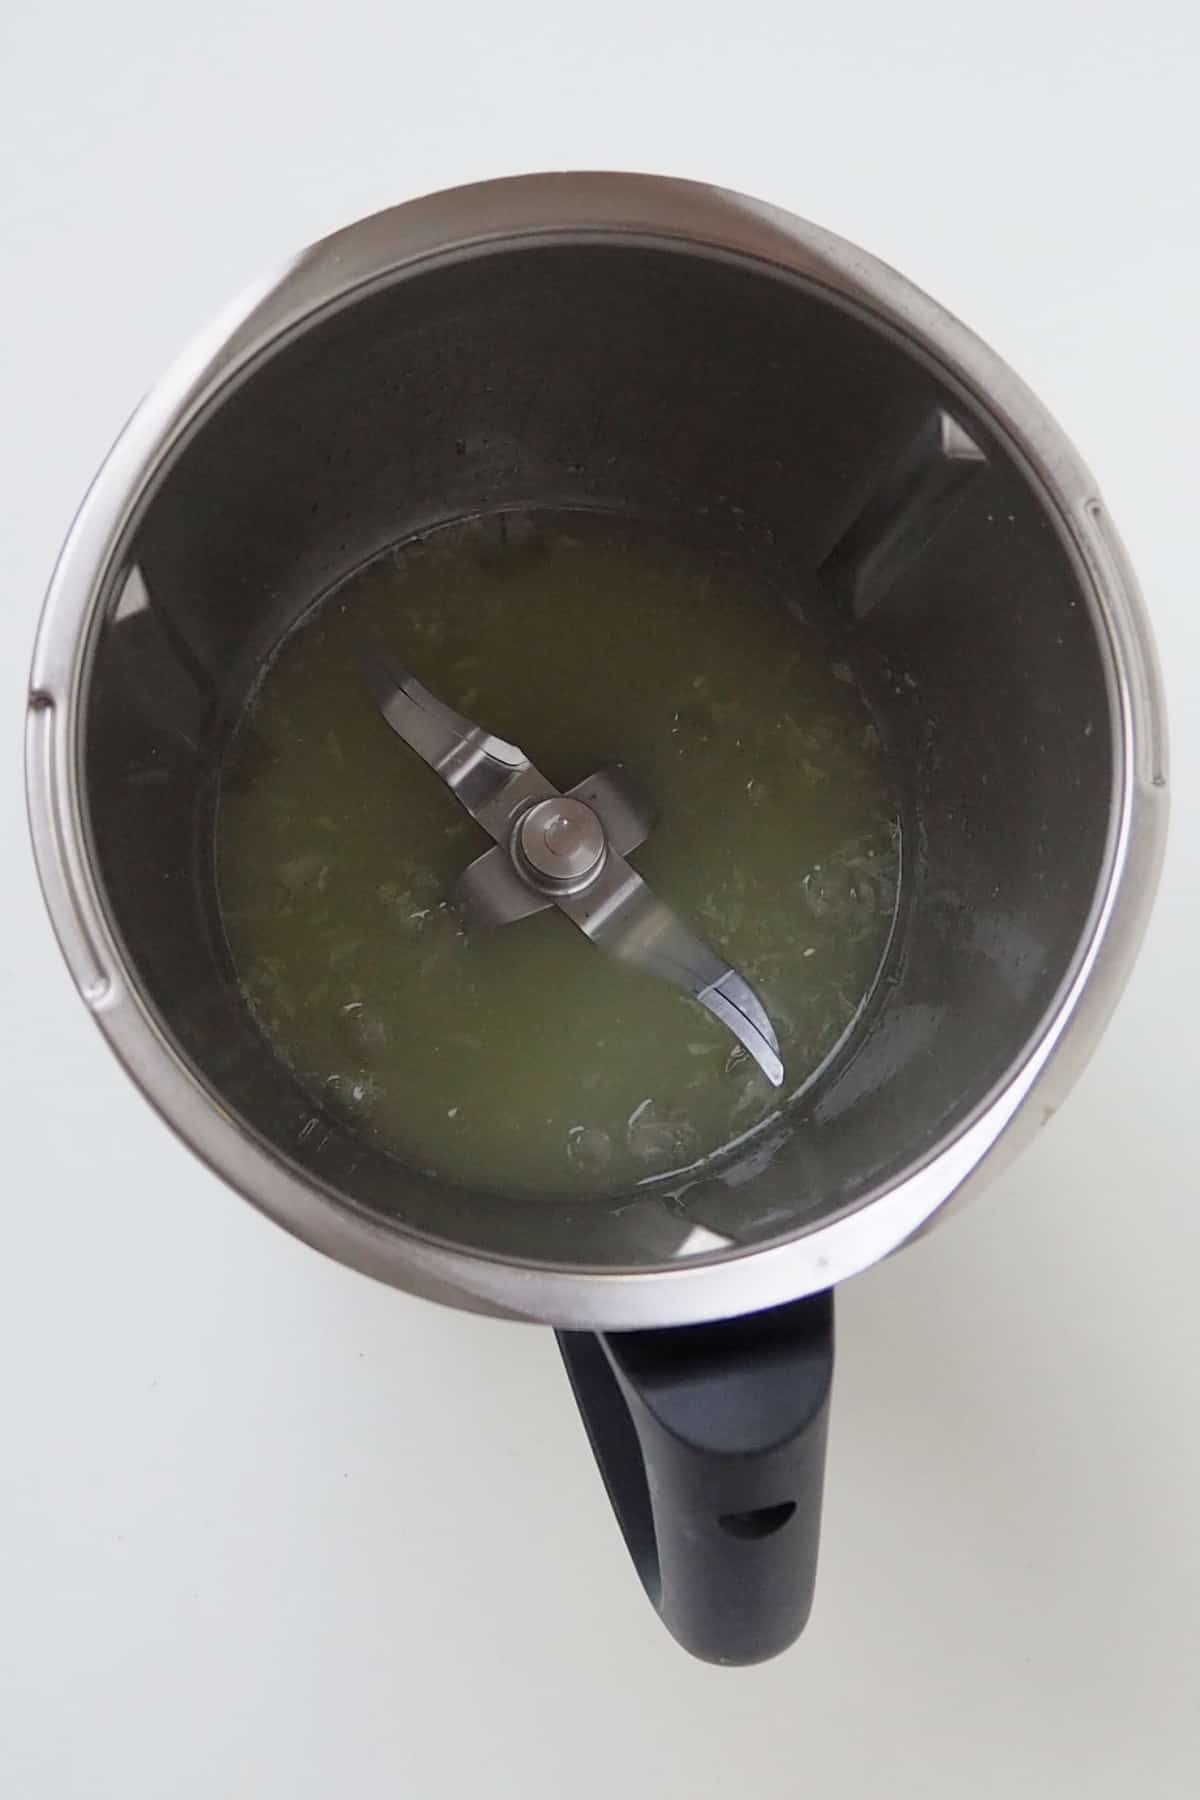 Combined Margarita mix in a thermomix bowl.